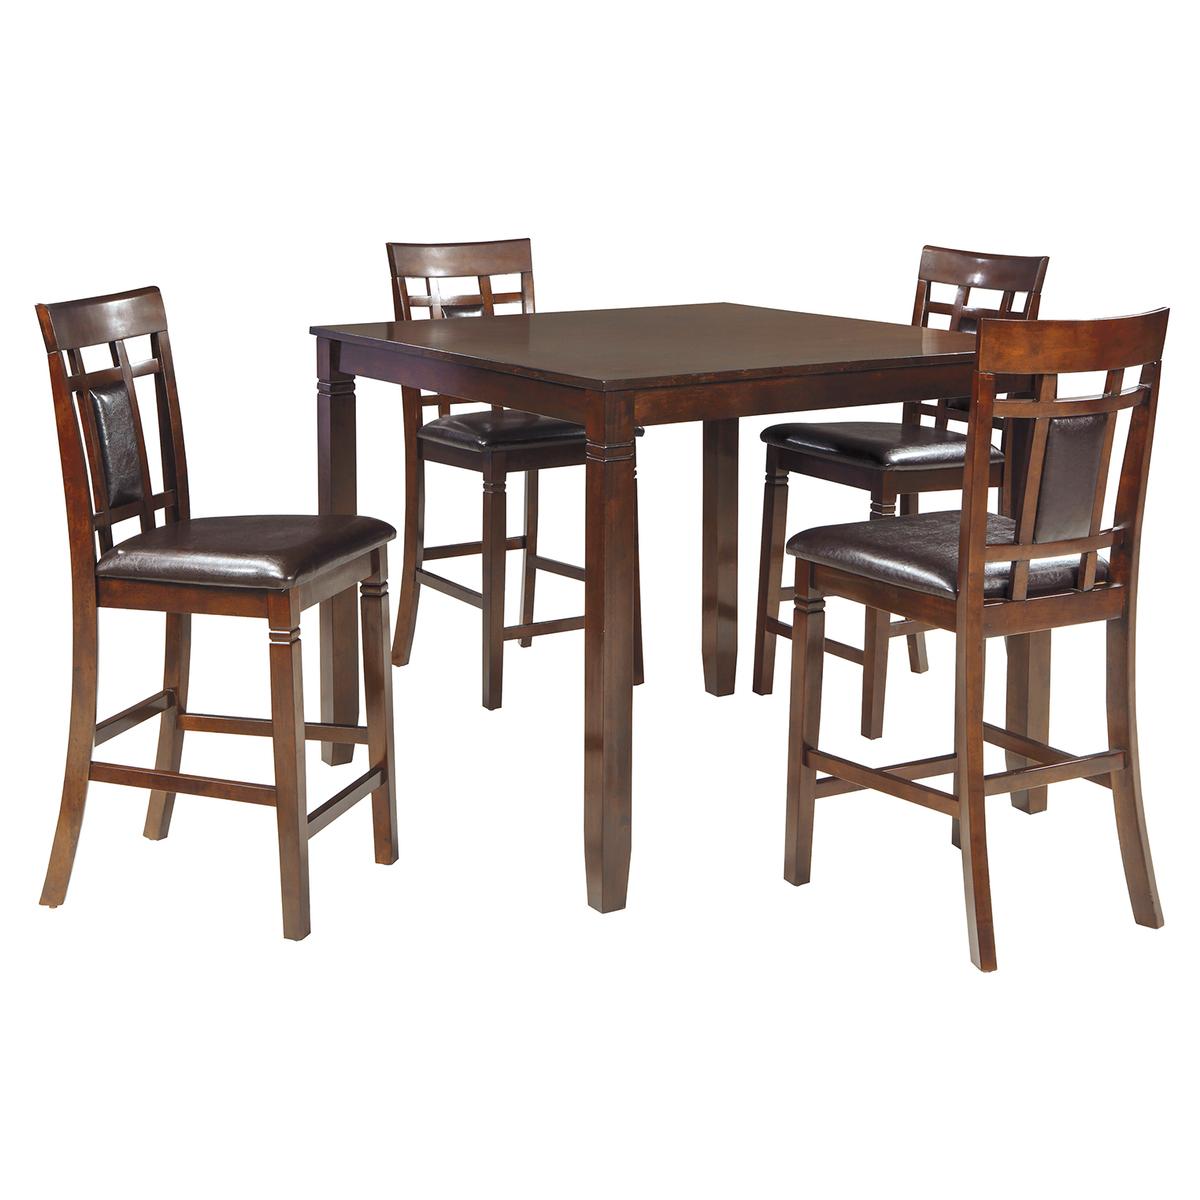 Ashley Bennox Counter Height Dining Table & 4 Bar Stools (5 Piece Set)